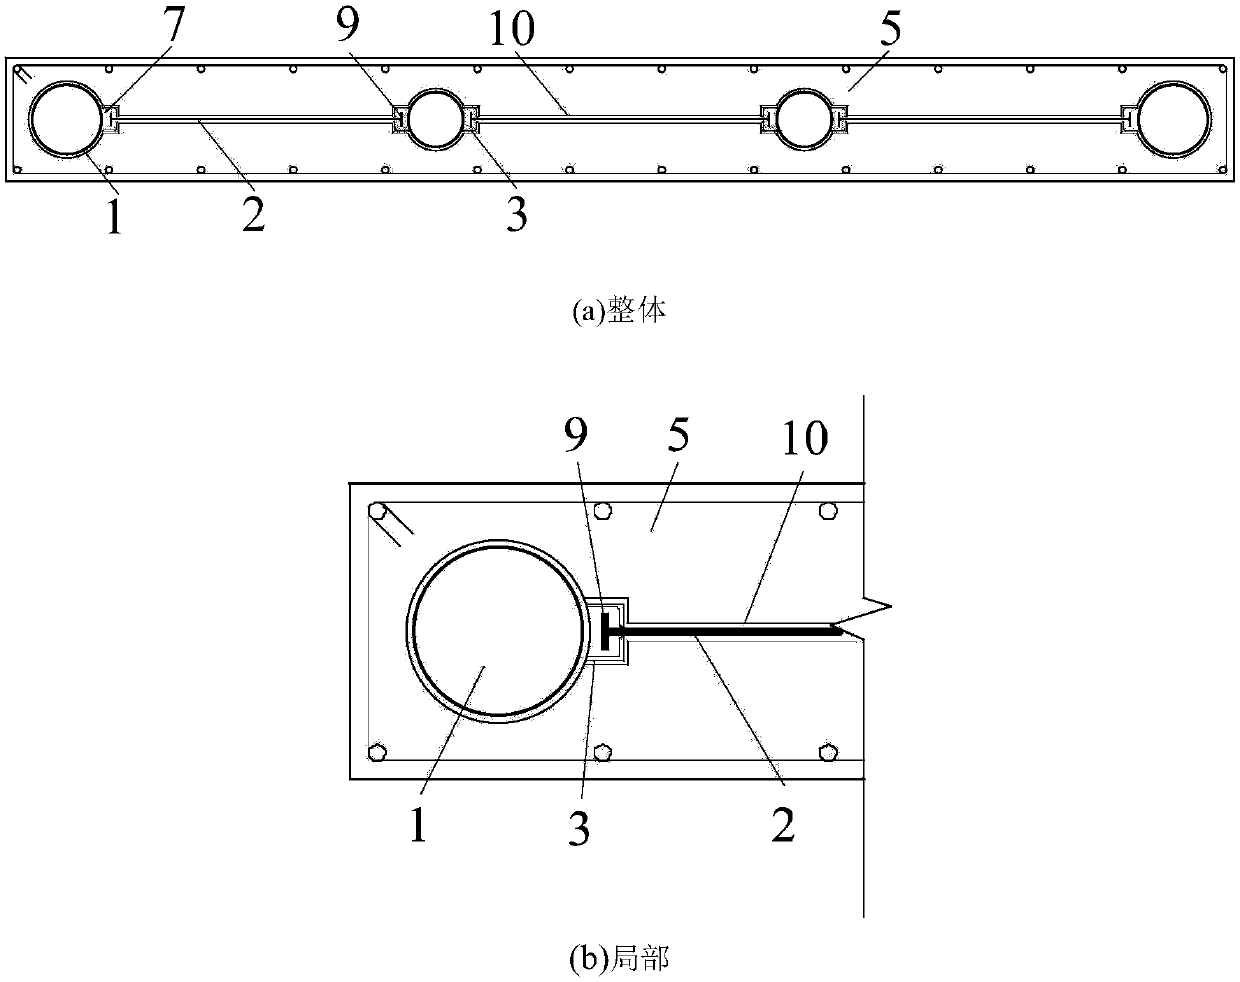 A superimposed composite shear wall with two-stage stress characteristics